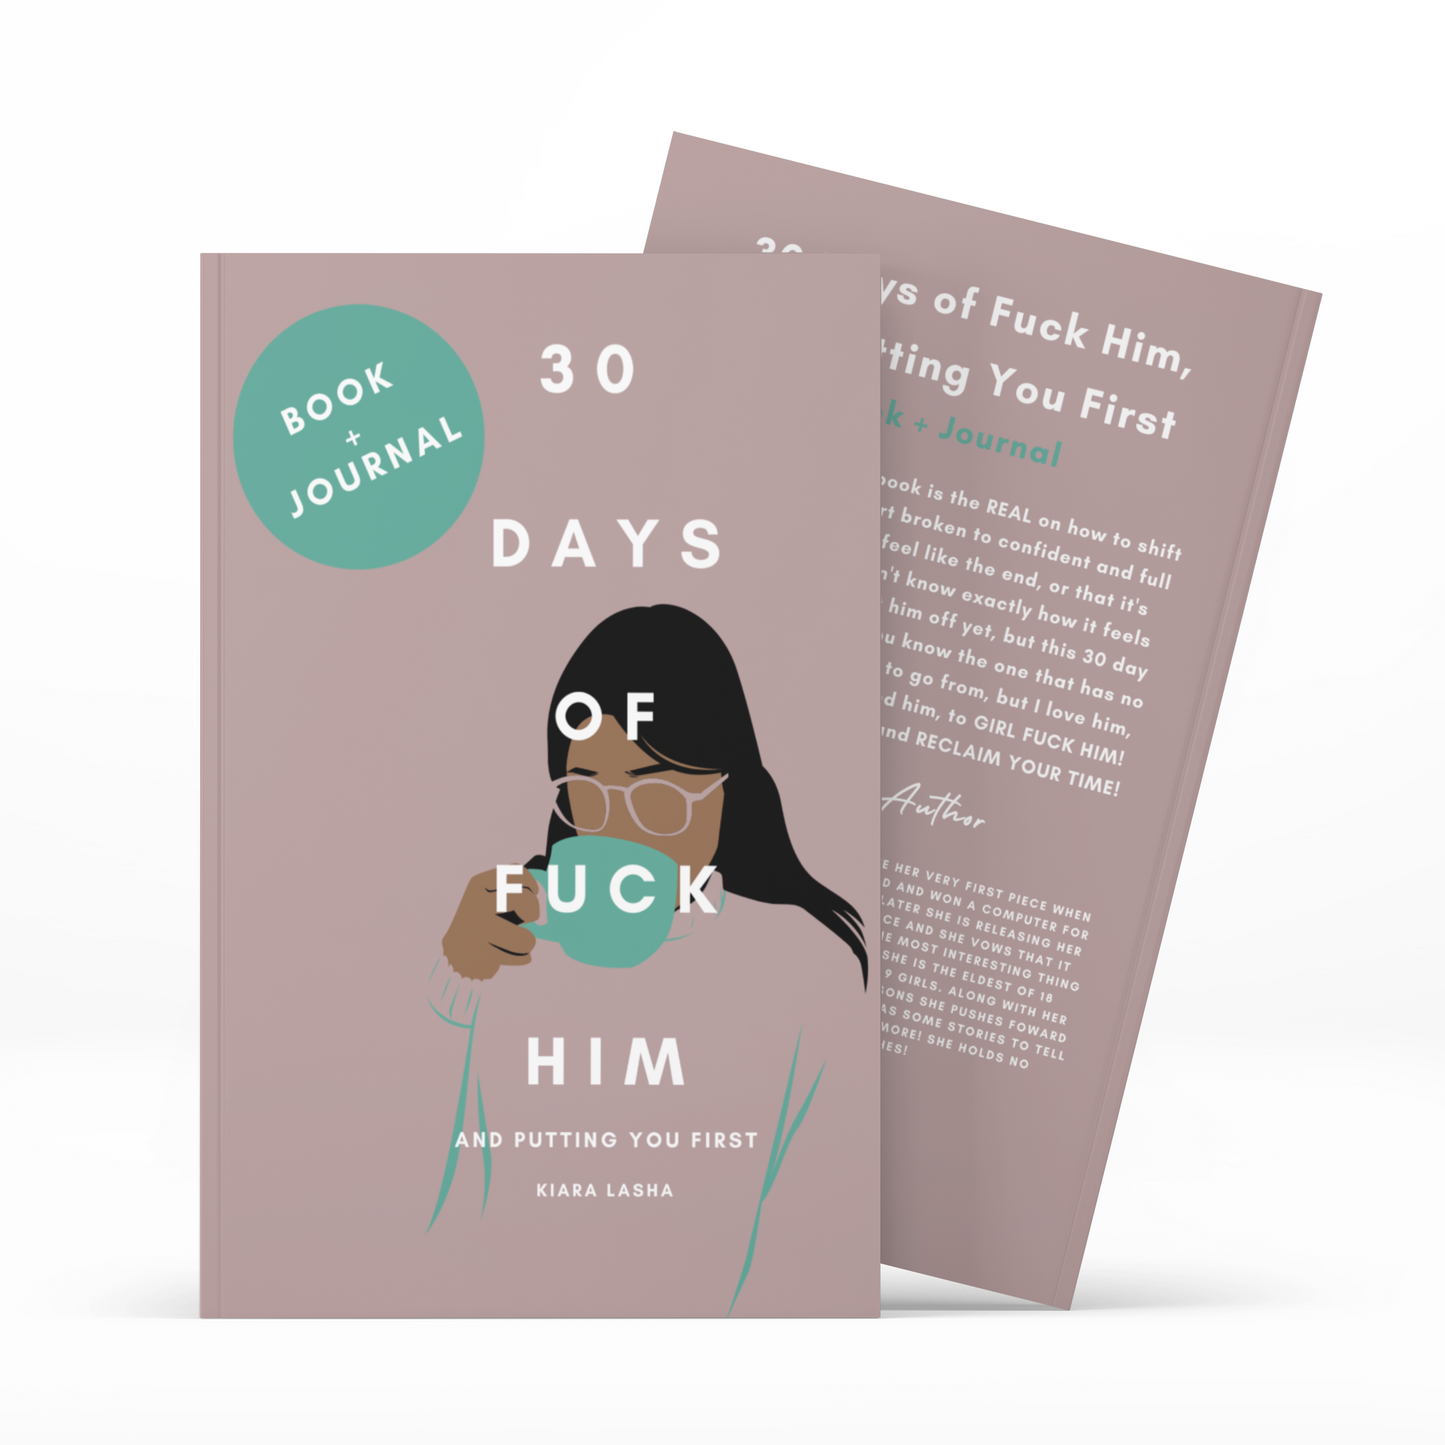 30 Days Of Fuck Him + Putting Yourself First Book and Guide.